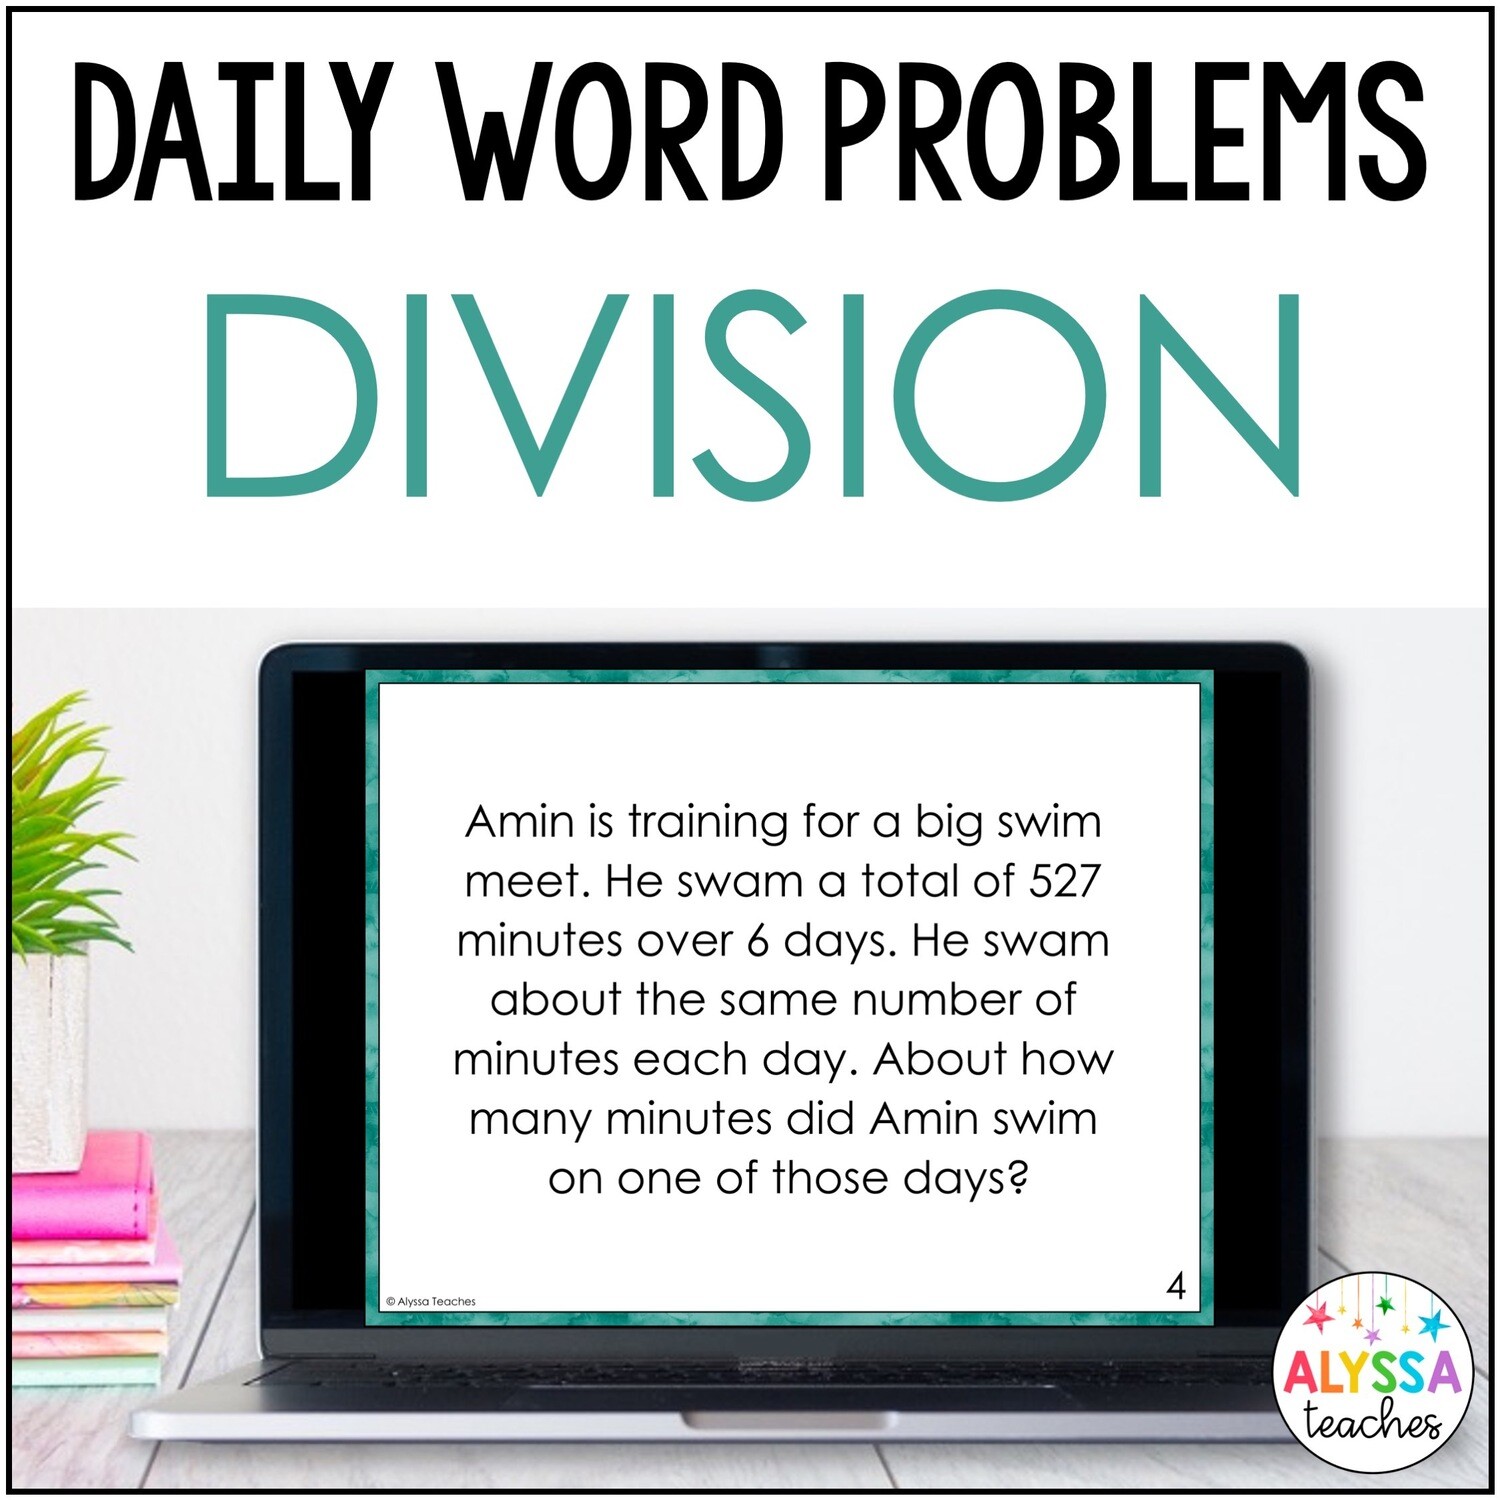 Division Word Problems for Daily Math Review